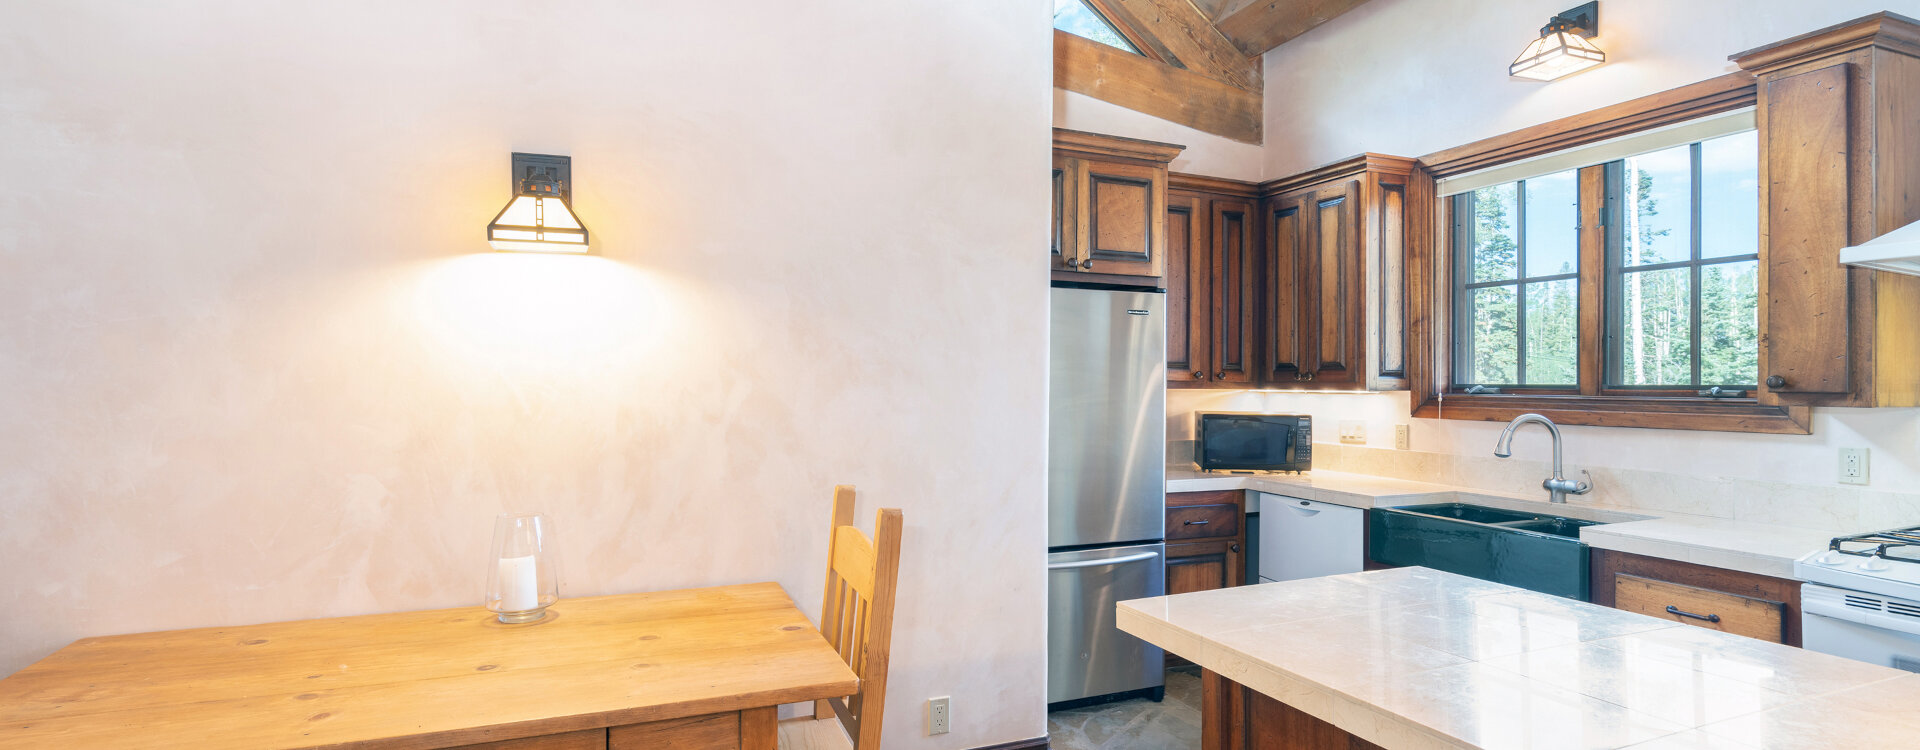 11.02-telluride-picture-perfect-guest-house-kitchen